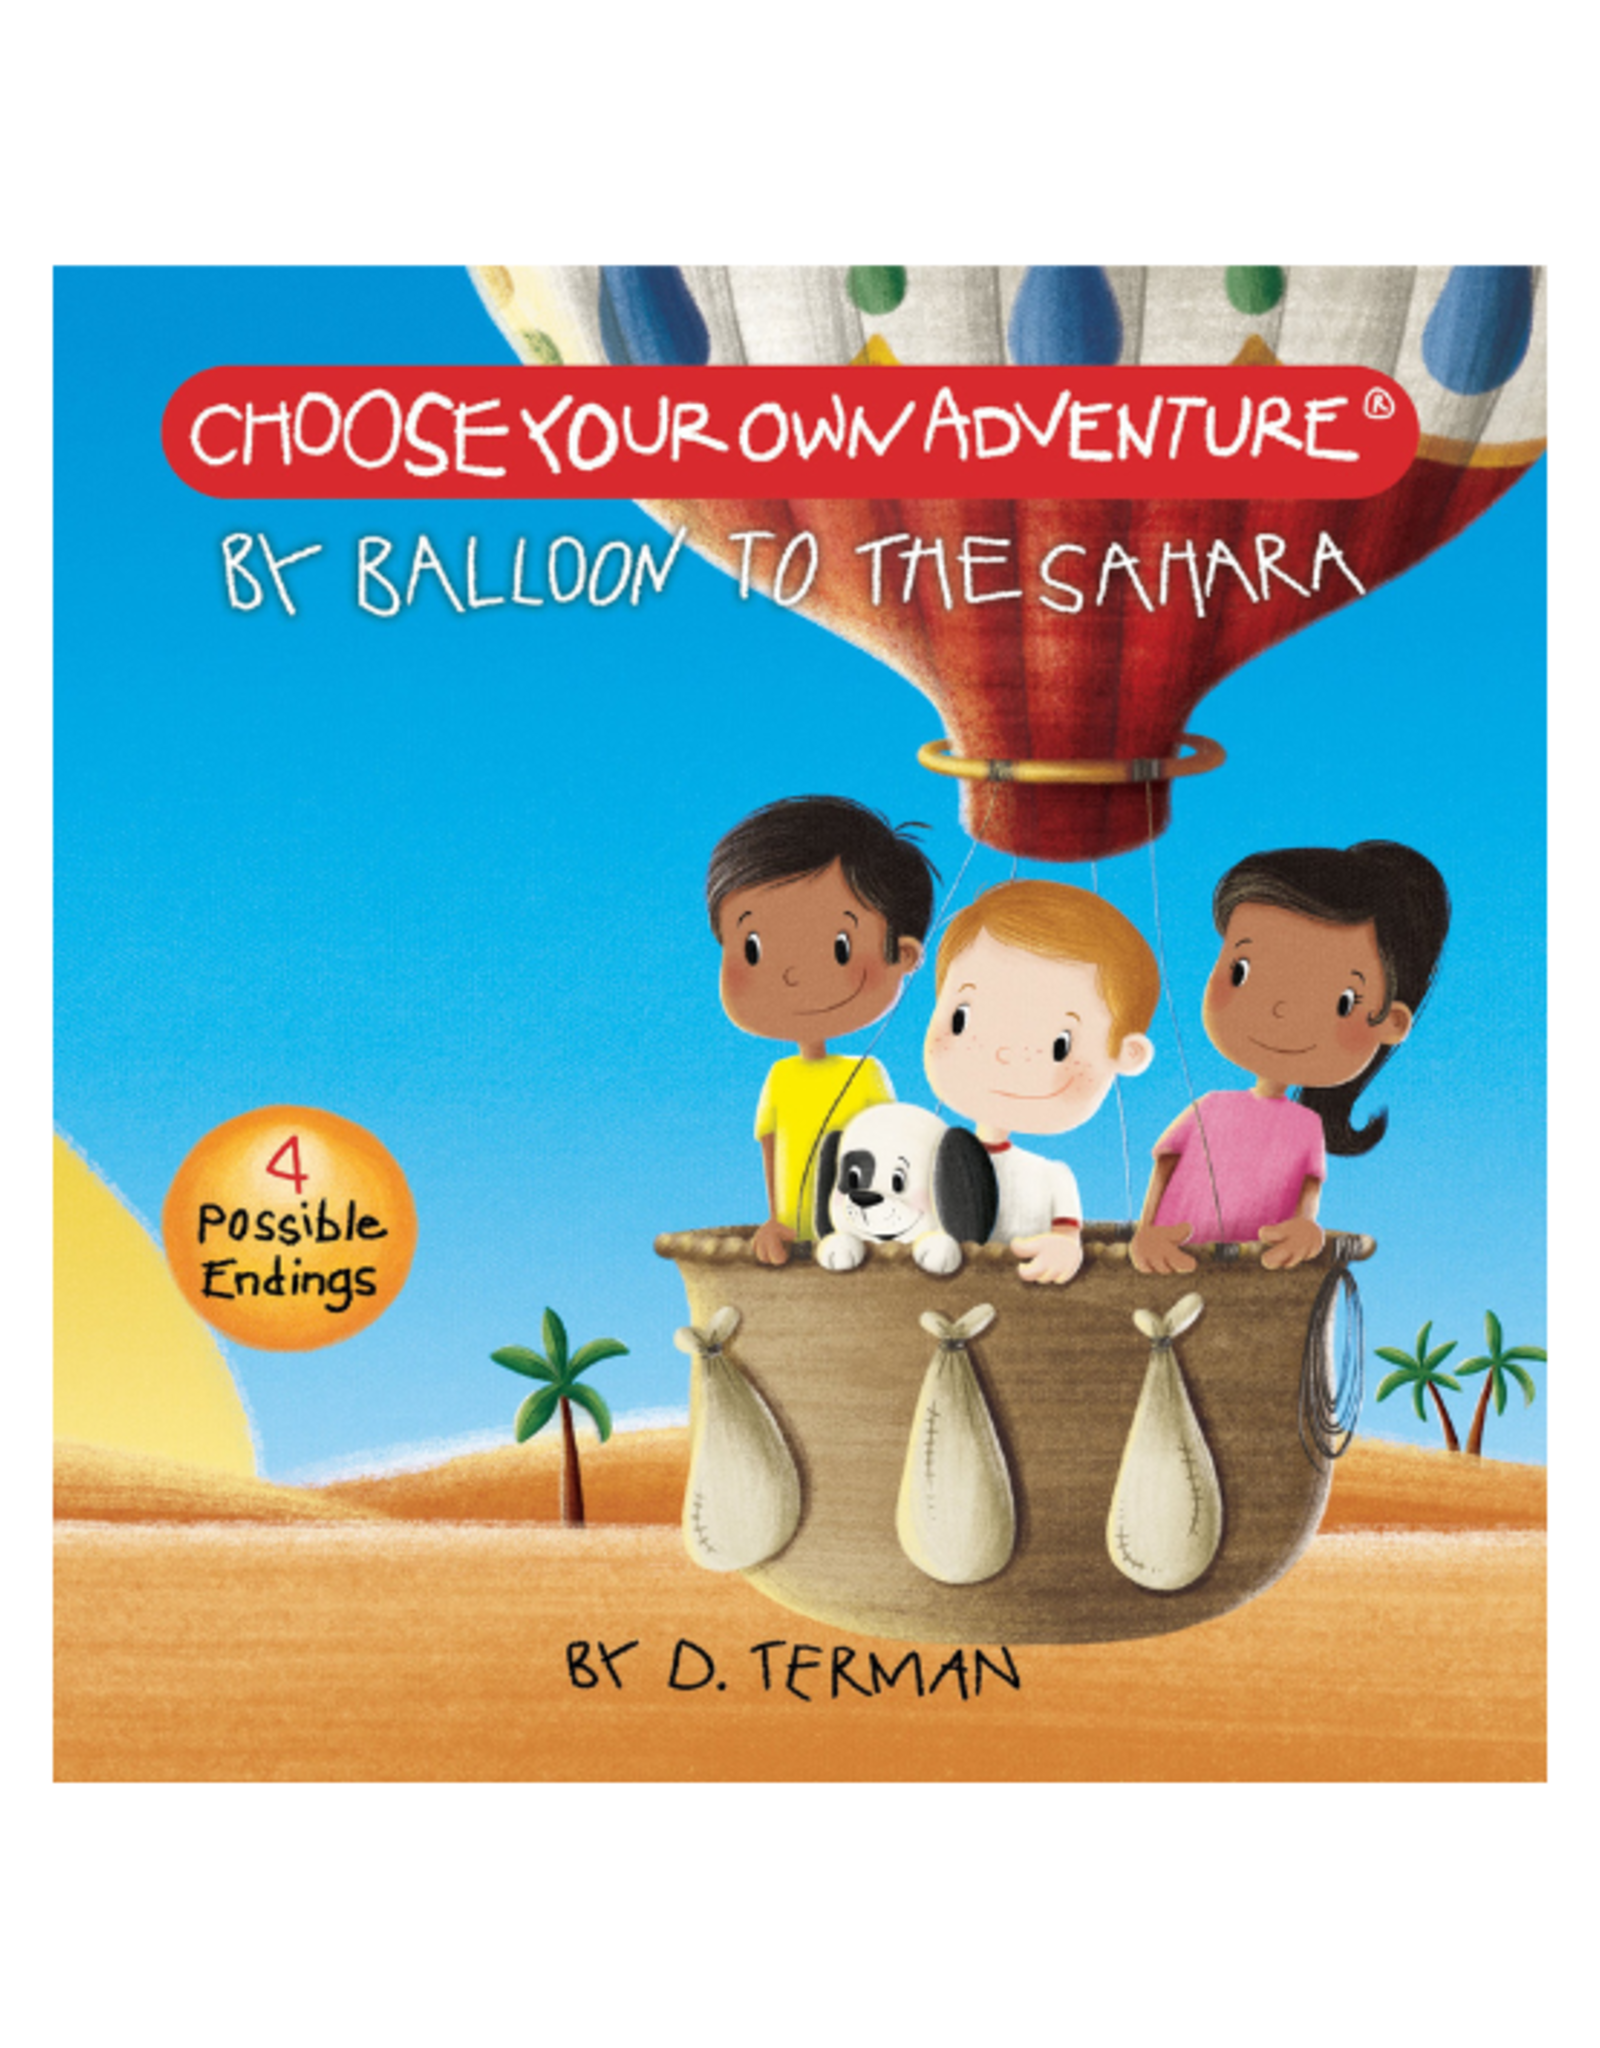 Choose Your Own Adventure Book - Choose Your Own Adventure Board Book - By Balloon to the Sahara